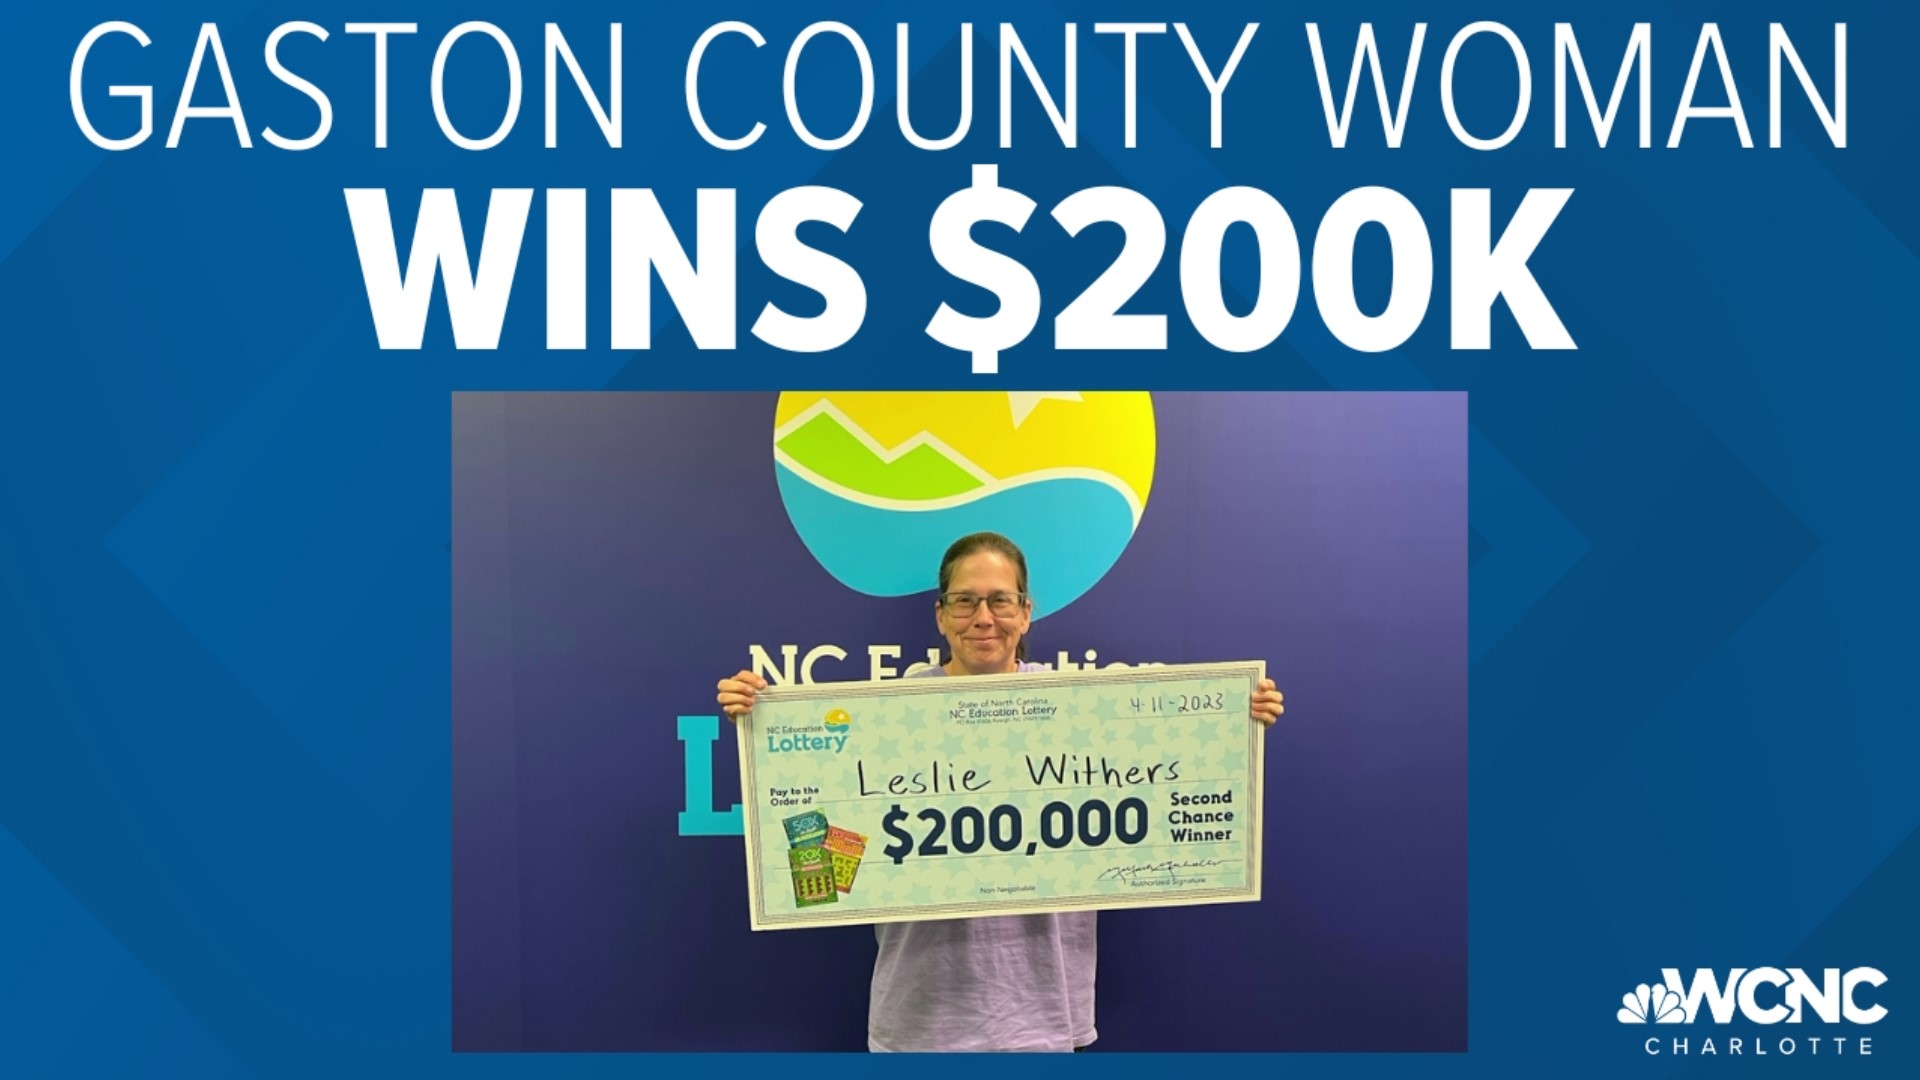 A Gaston County woman says she can now buy a new Jeep after winning big in the North Carolina Education Lottery.